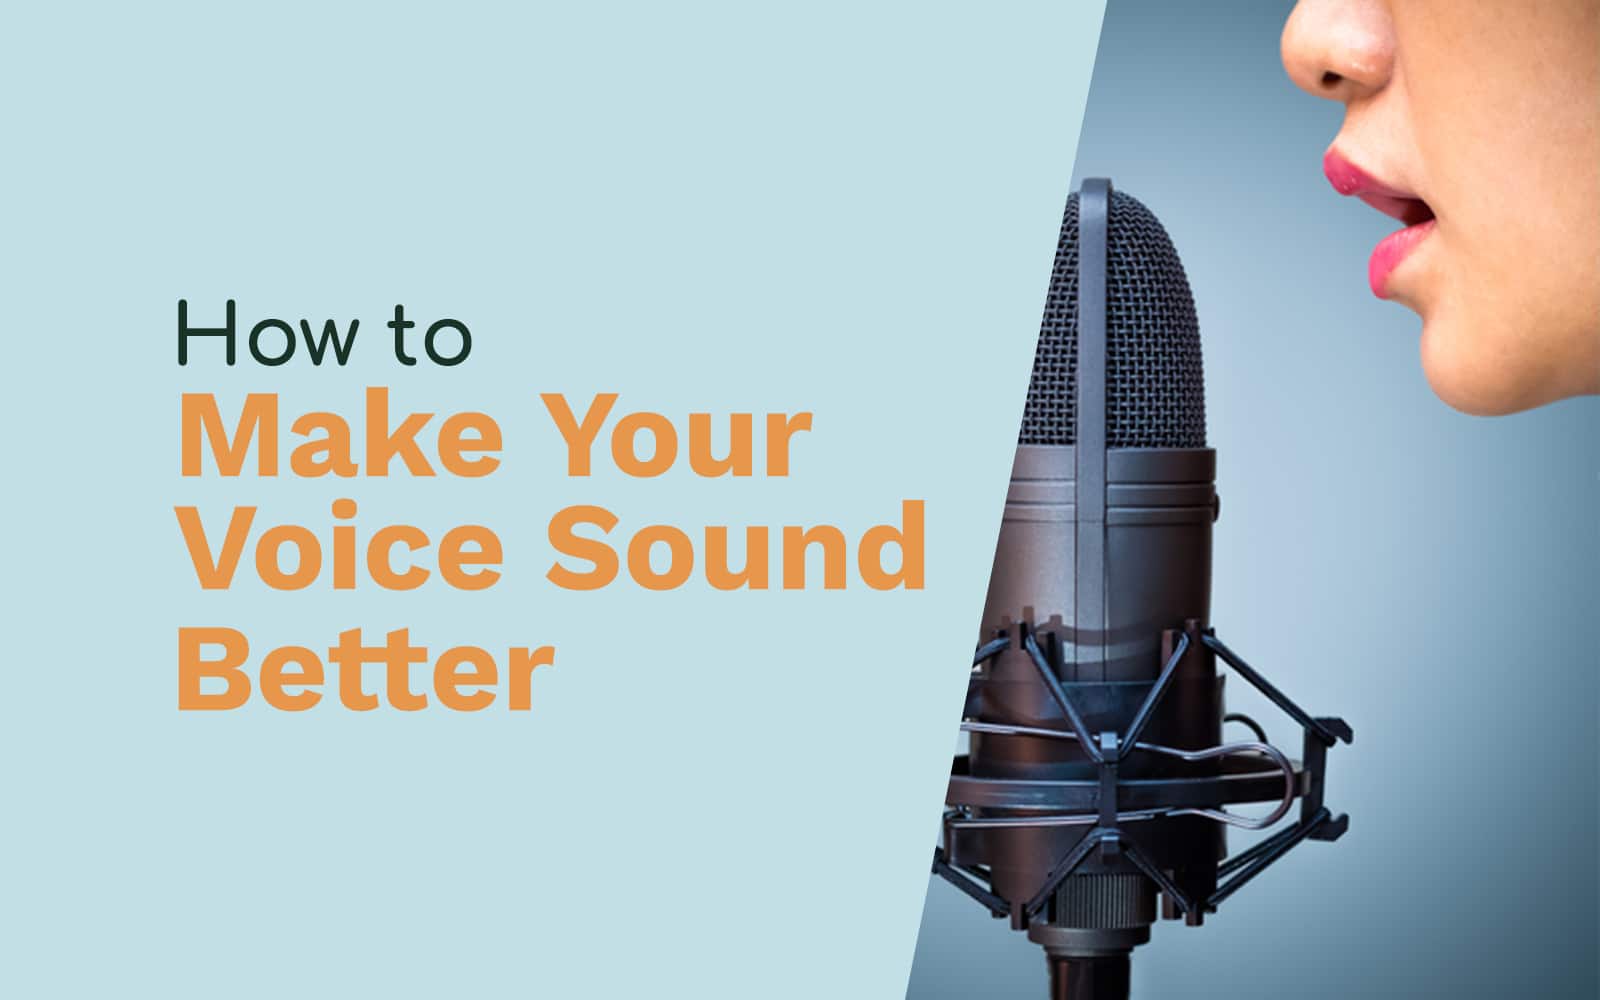 How to Make Your Voice Sound Better Audio Quality voice Music Radio Creative